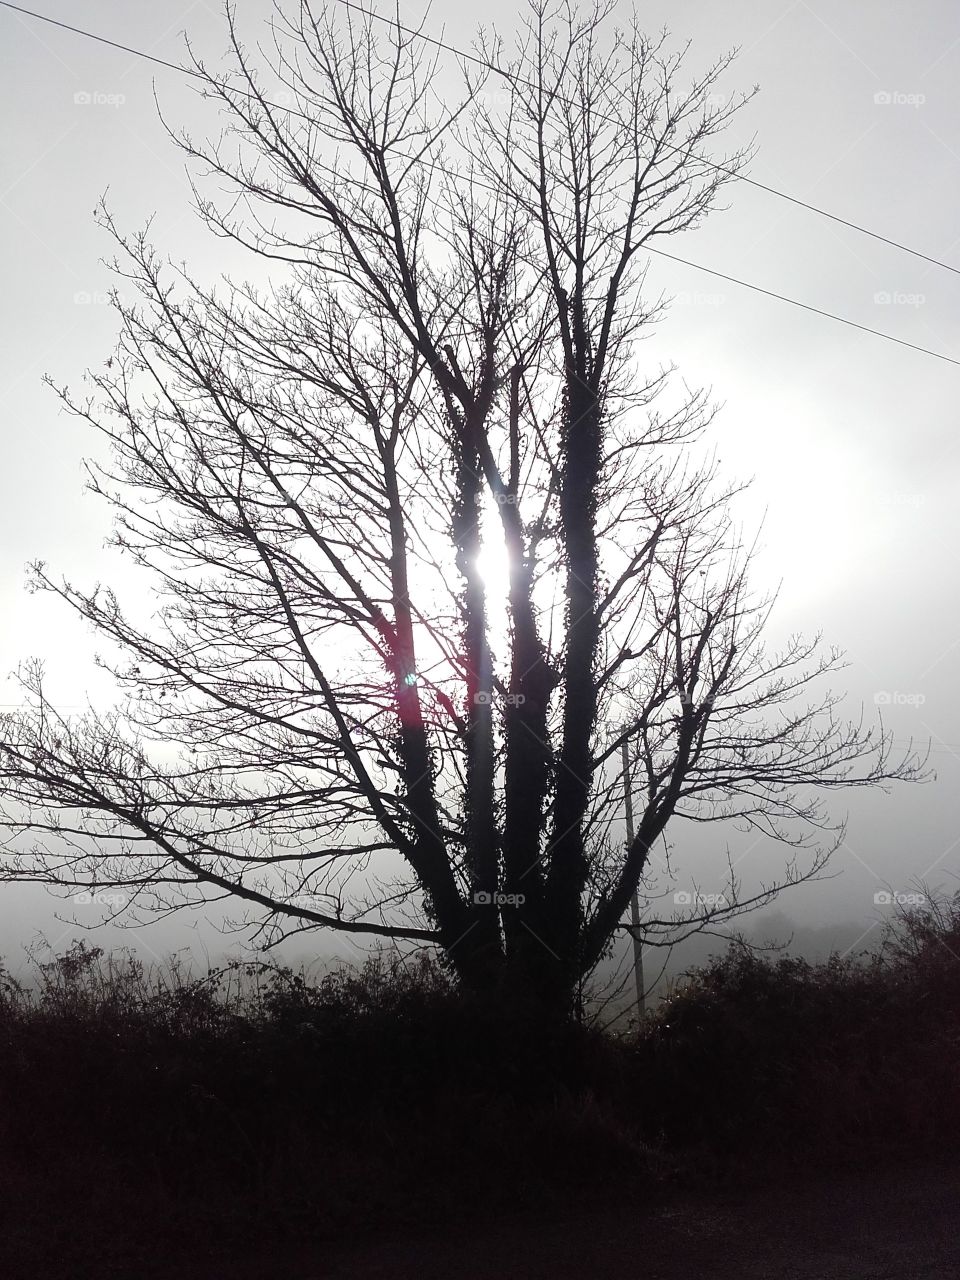 Bare winter tree surrounded by fog, backlit by a low lying winter sun